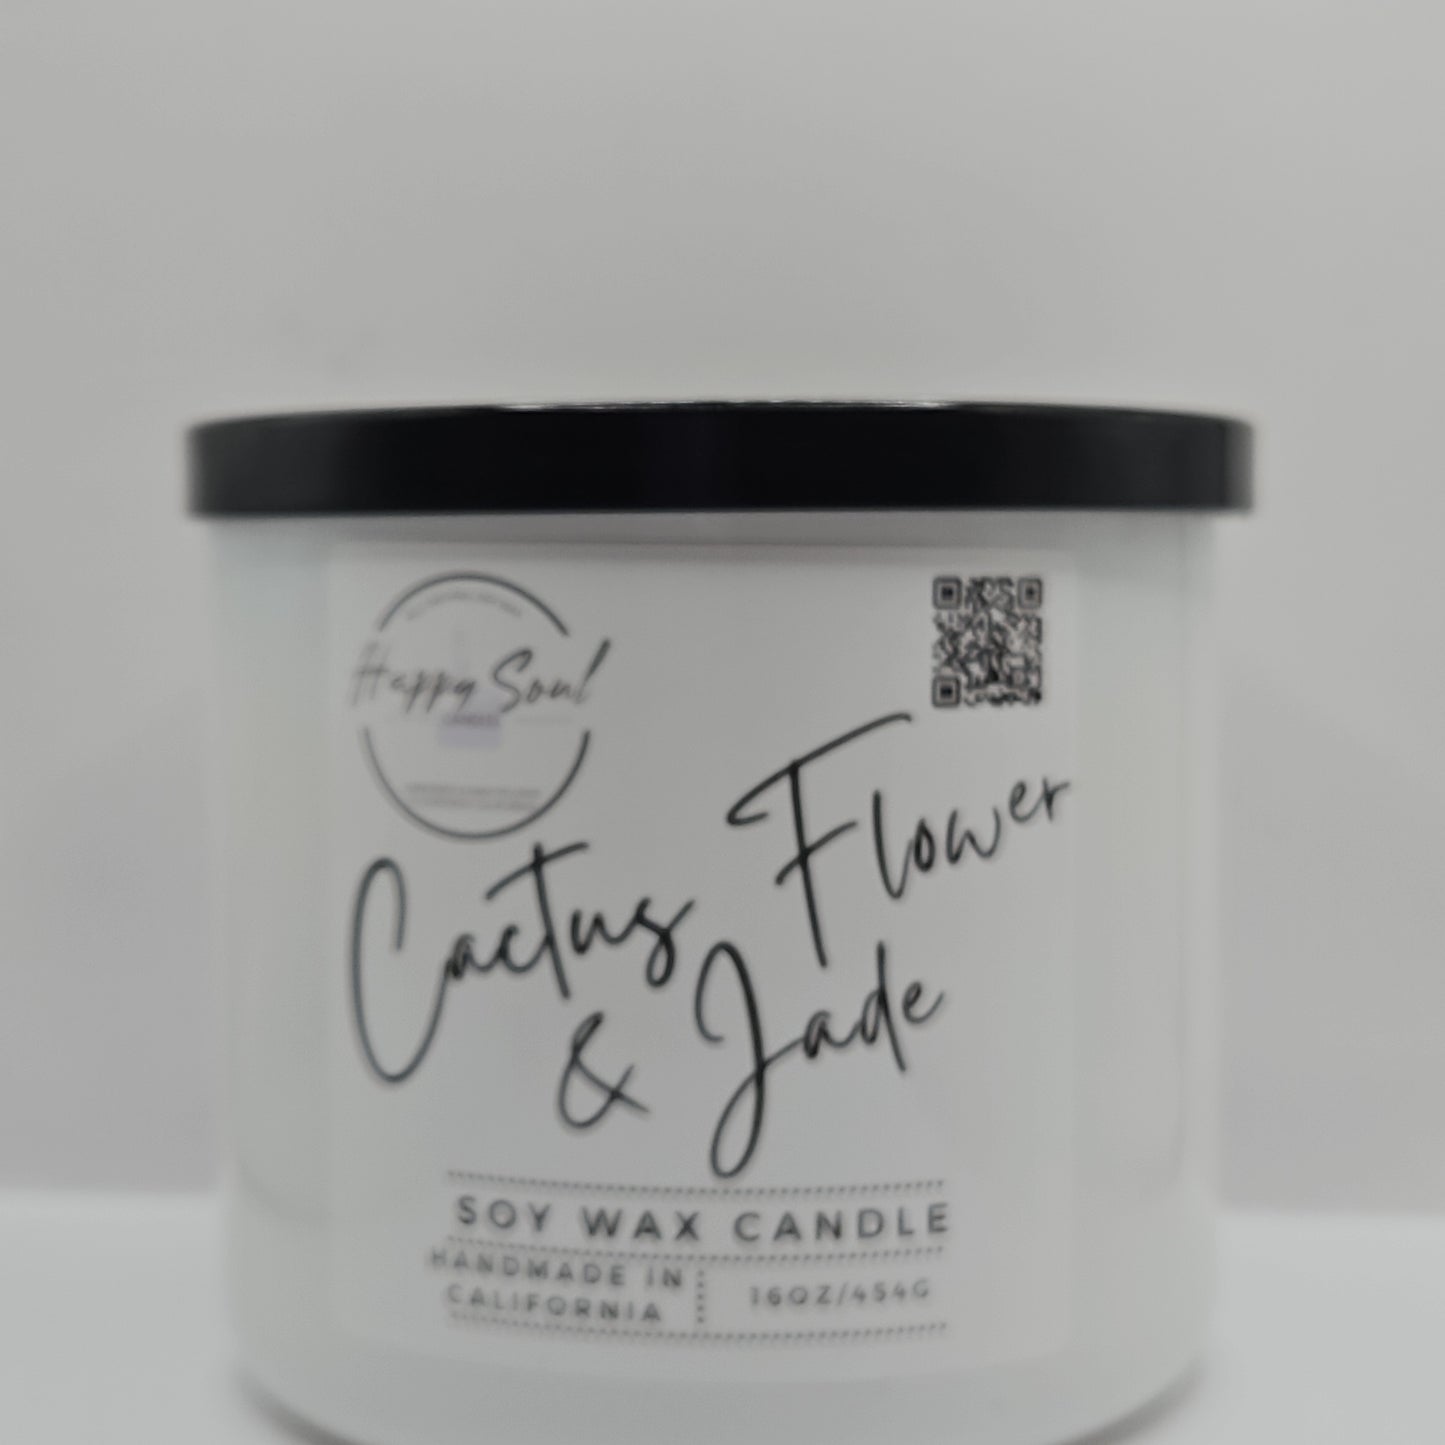 Cactus Flower and Jade 3-Wick Soy Candle (16oz)